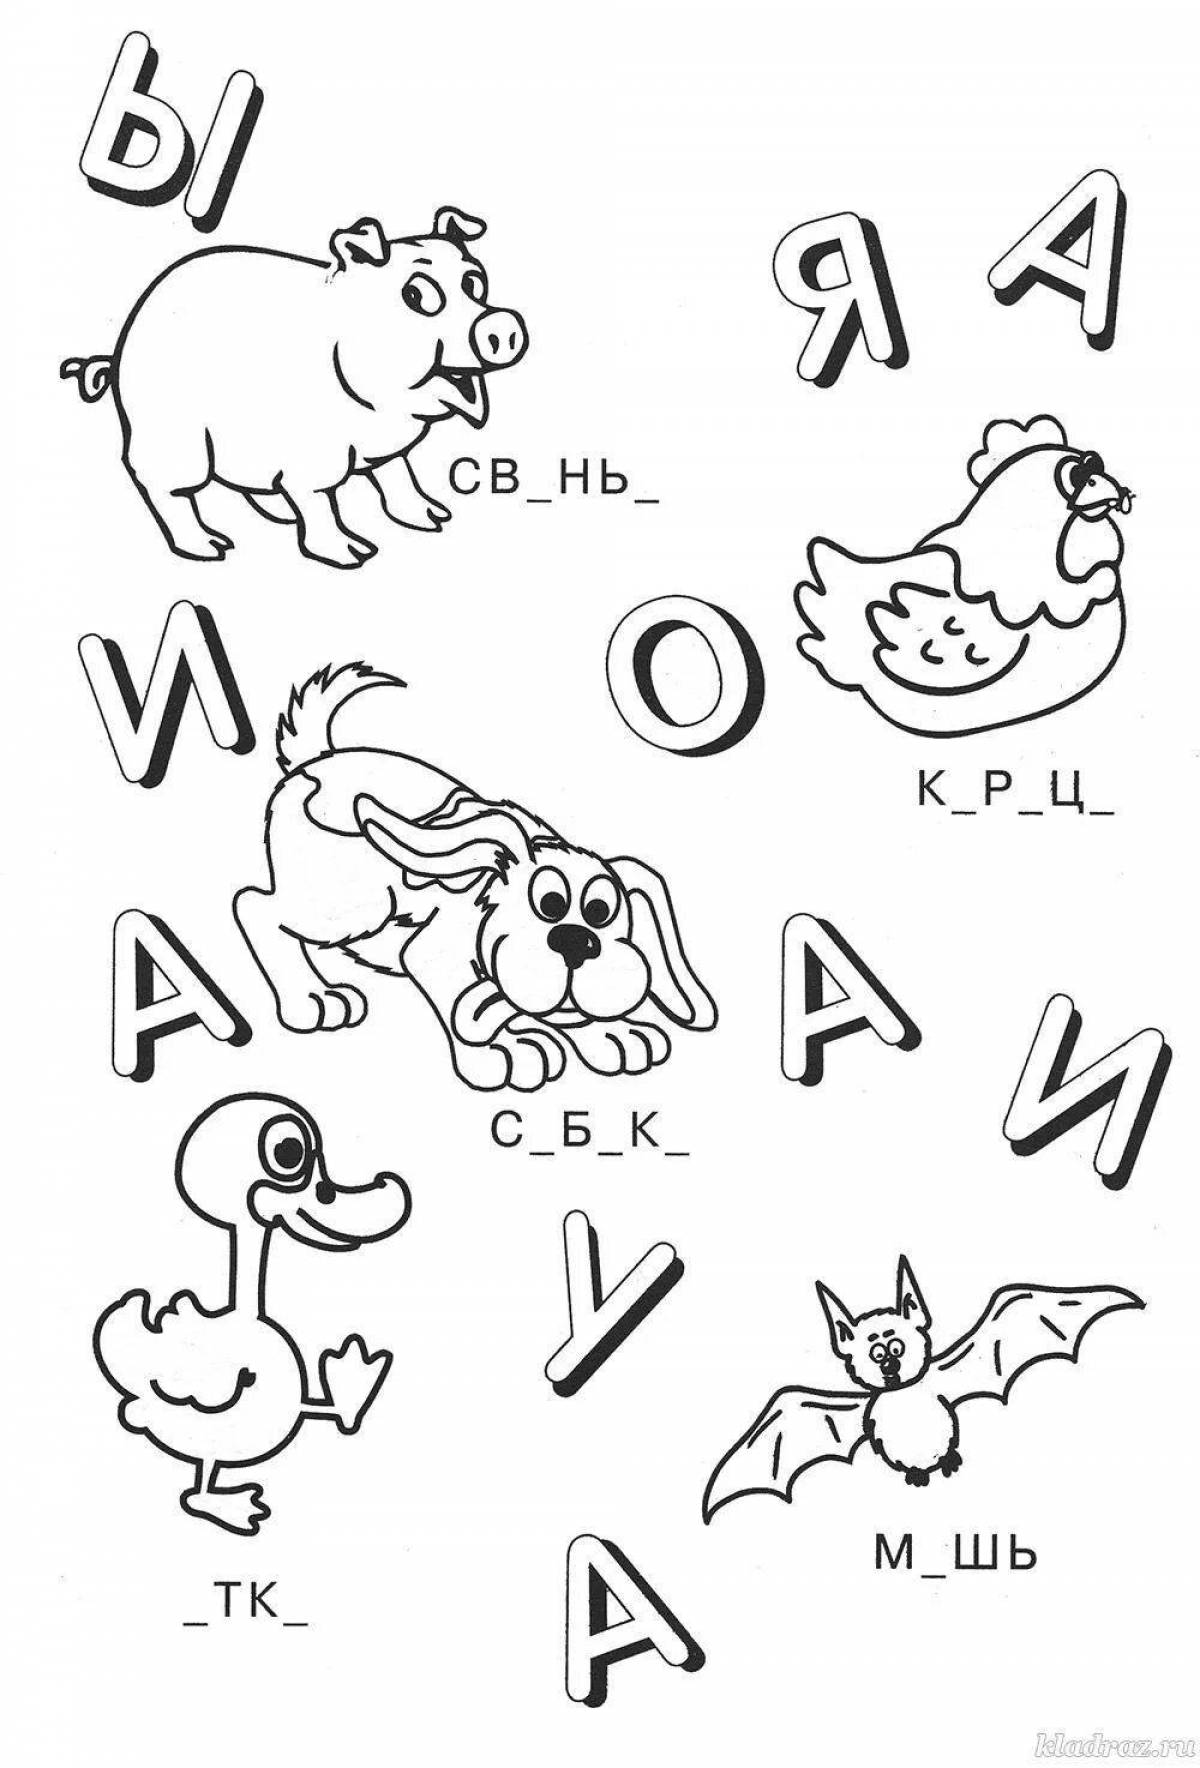 Colourful vowels coloring book